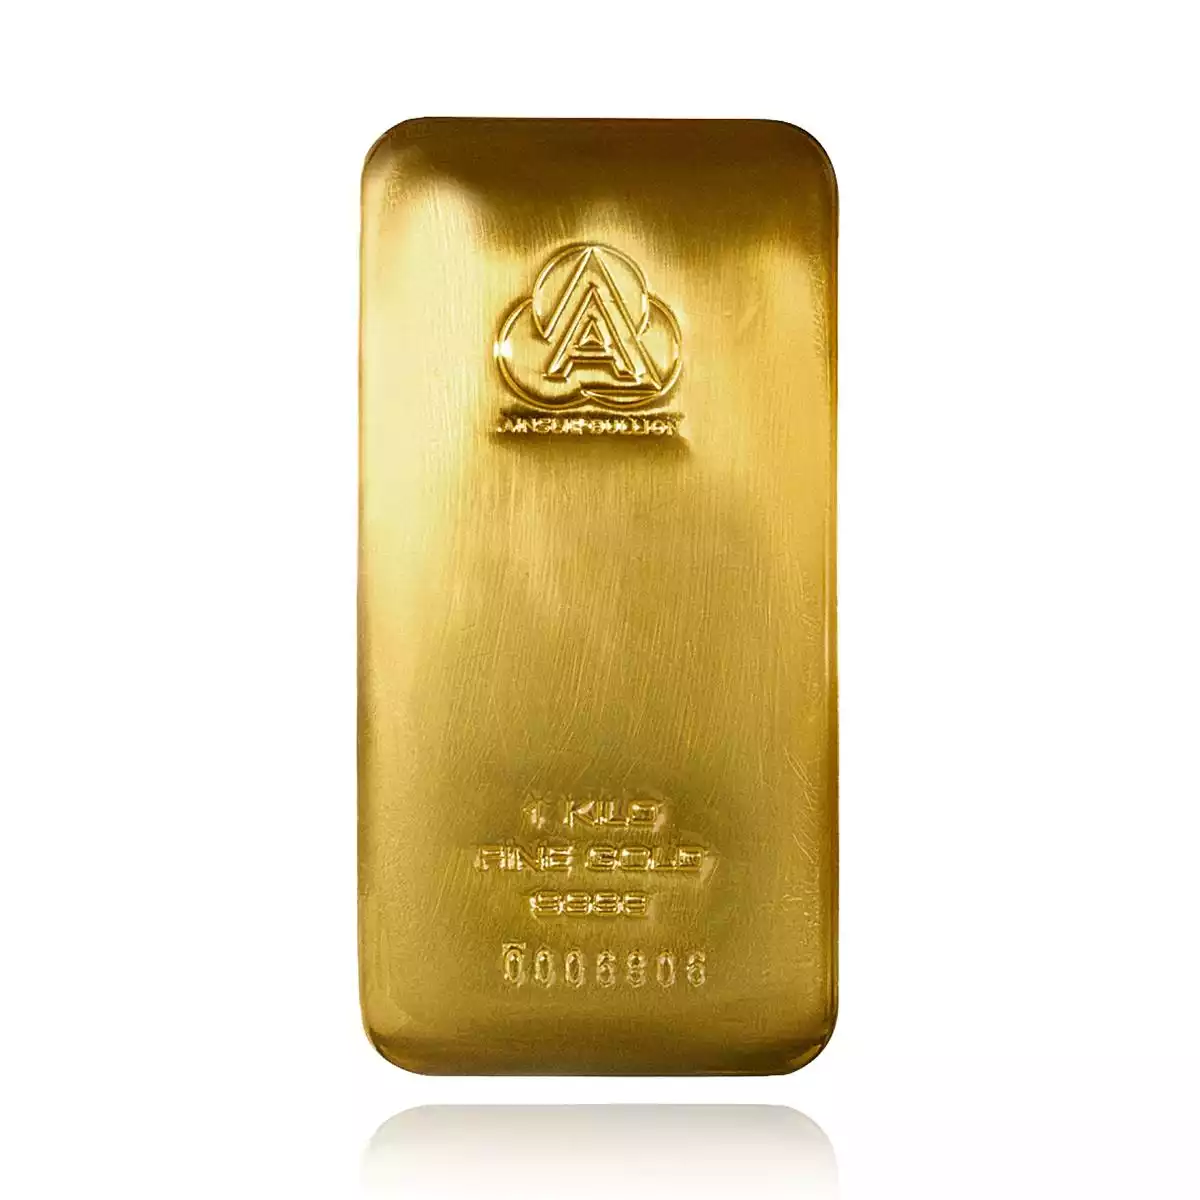 1kg ainslie gold bullion. the ainslie bullion 1kg gold bar is the largest gold bar available in the ainslie bullion range. the size gives investors th...